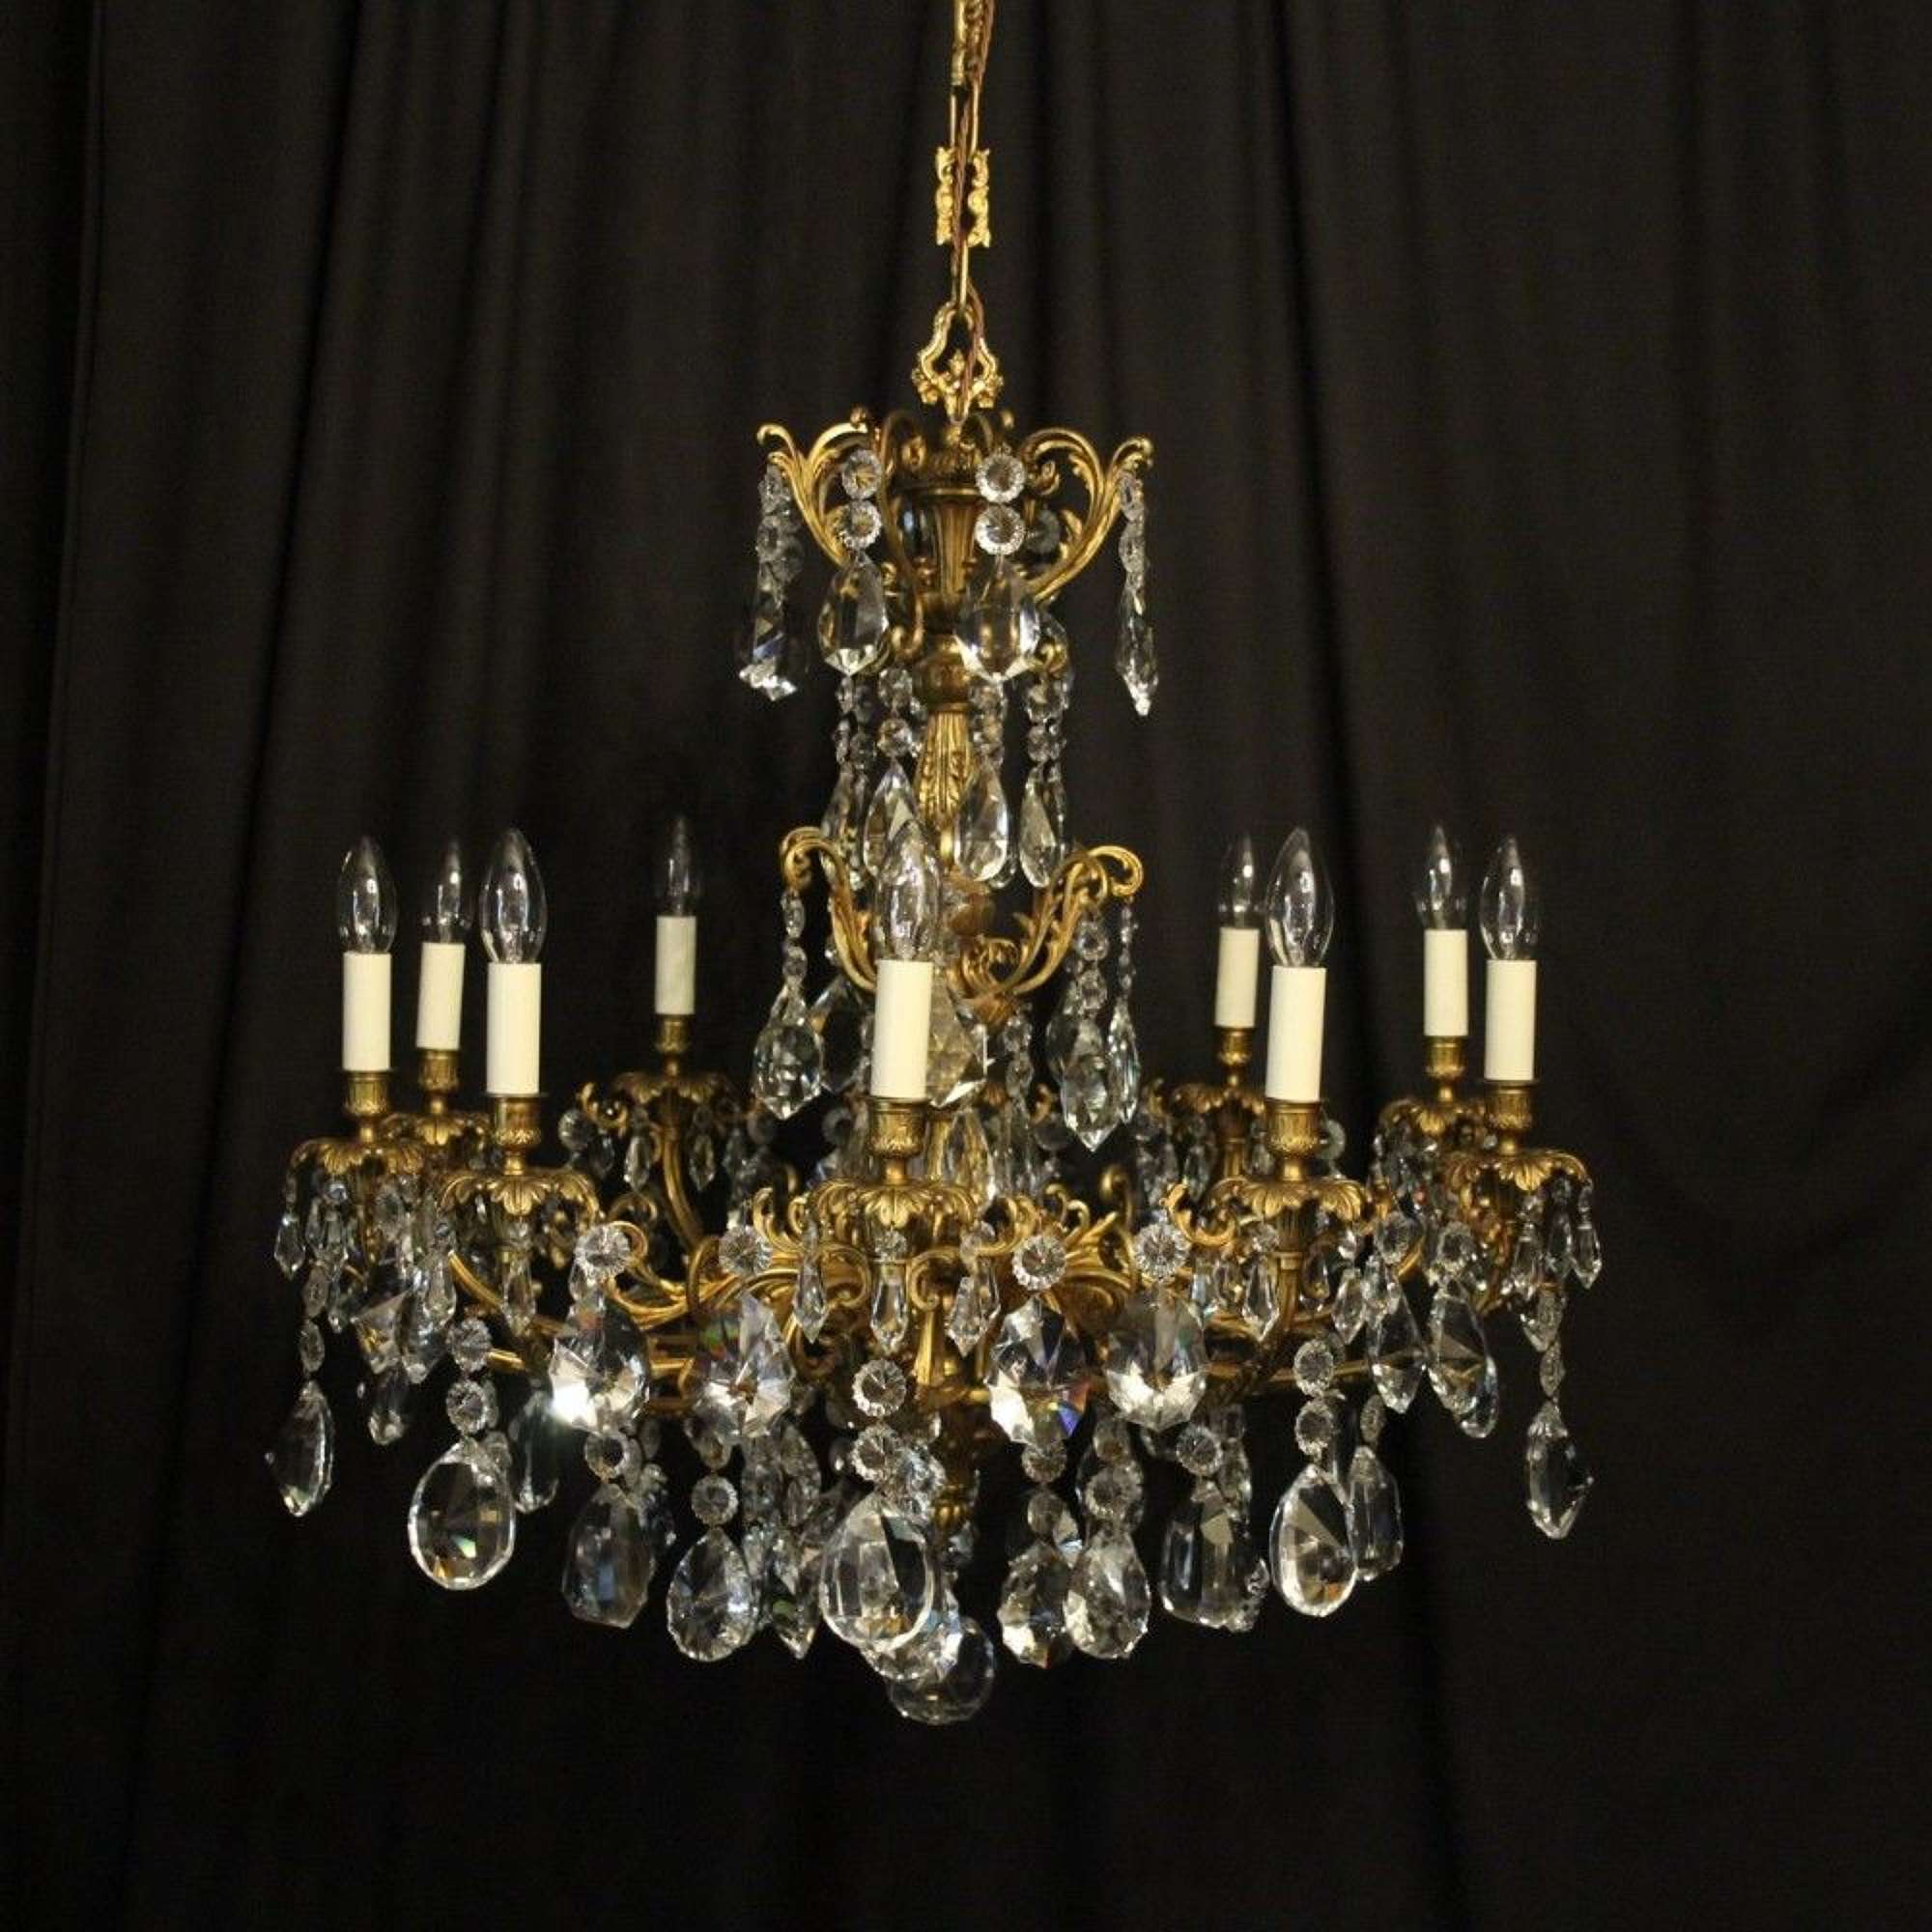 French 19th Century Gilded Bronze & Crystal Antique Chandelier